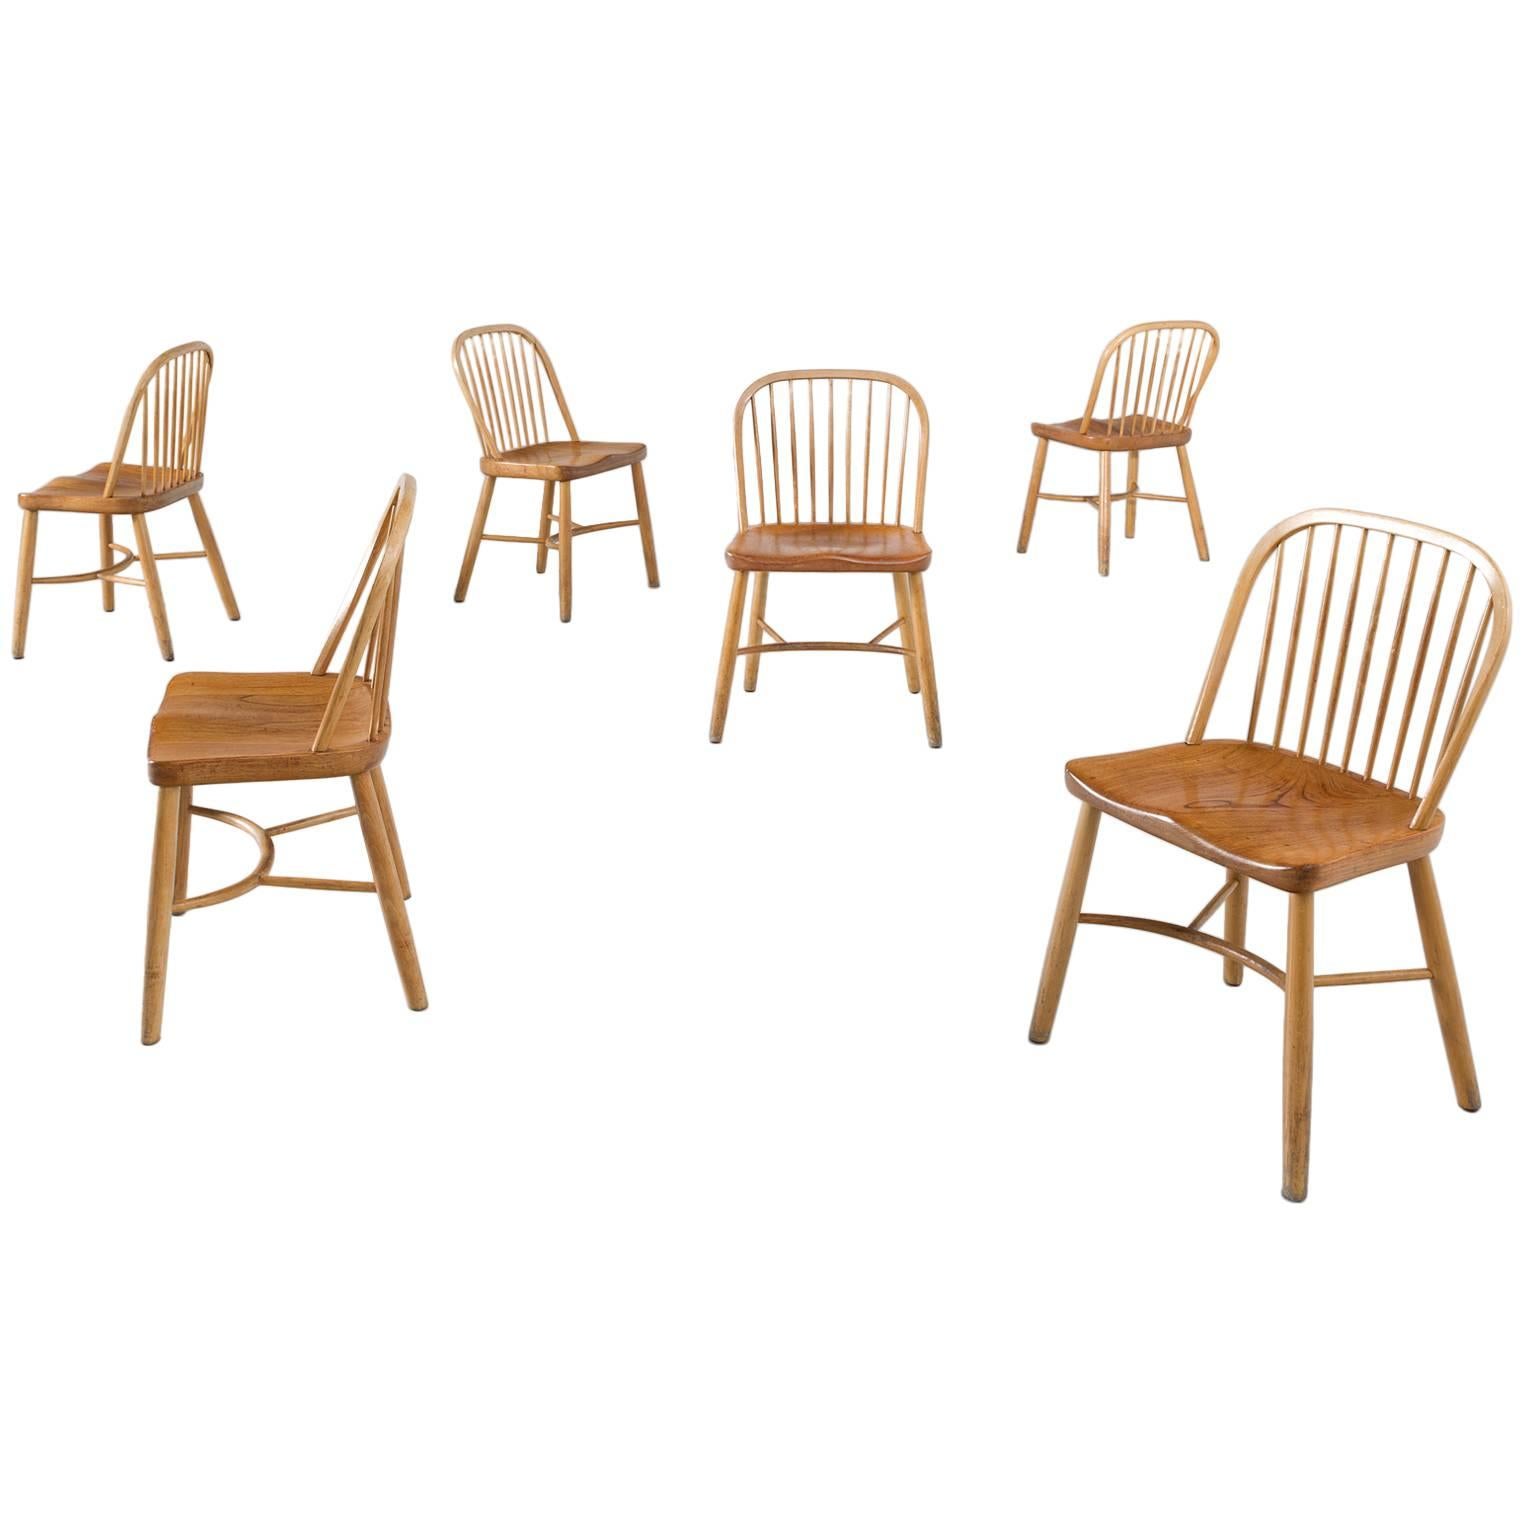 Palle Suenson Set of Six Spindle Back Chairs